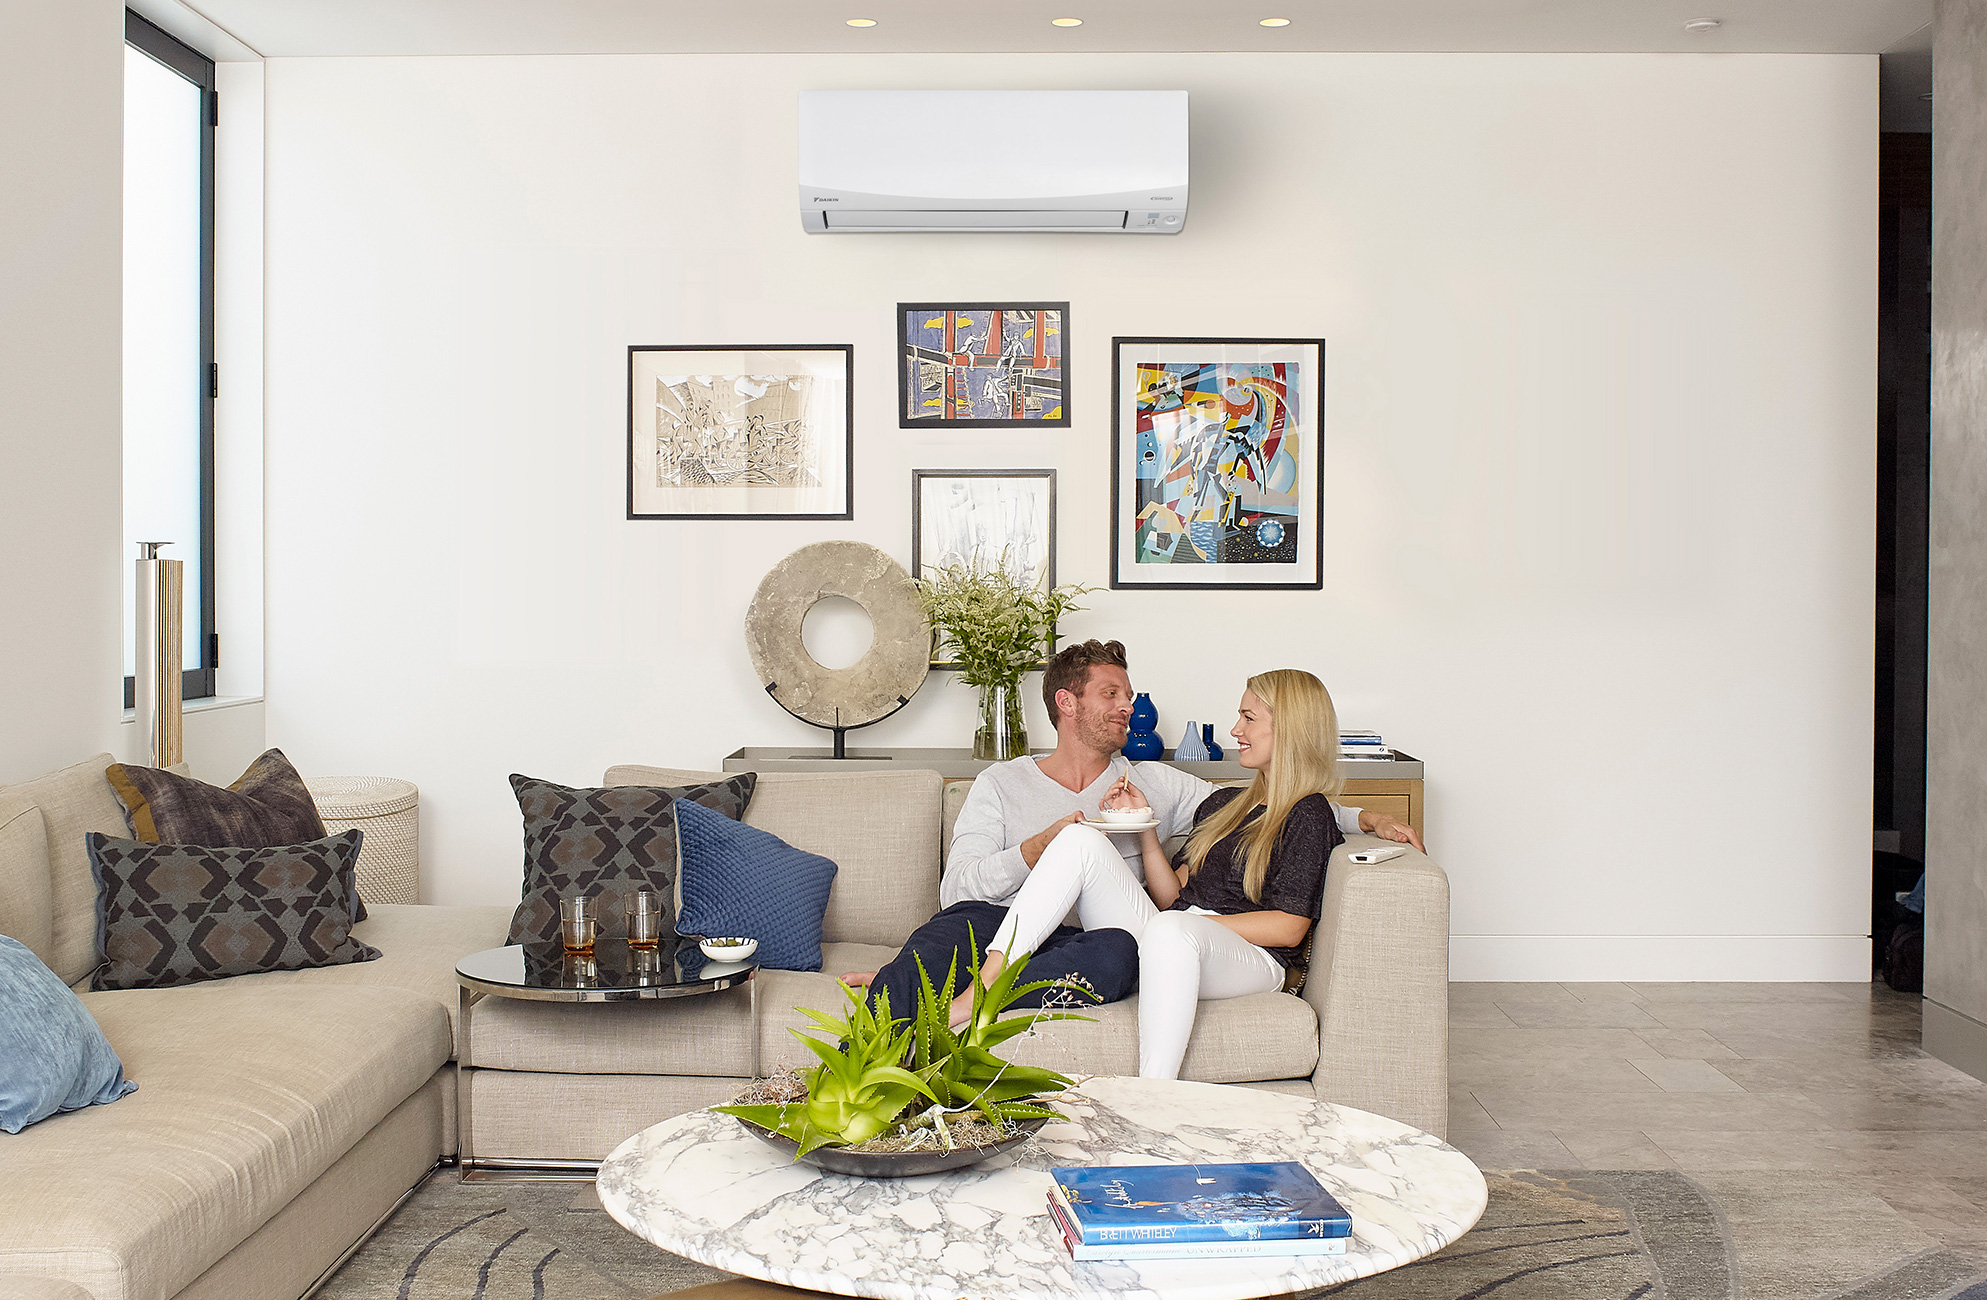 Image of a couple relaxing on a sofa, enjoying the cool comfort of an air conditioner.